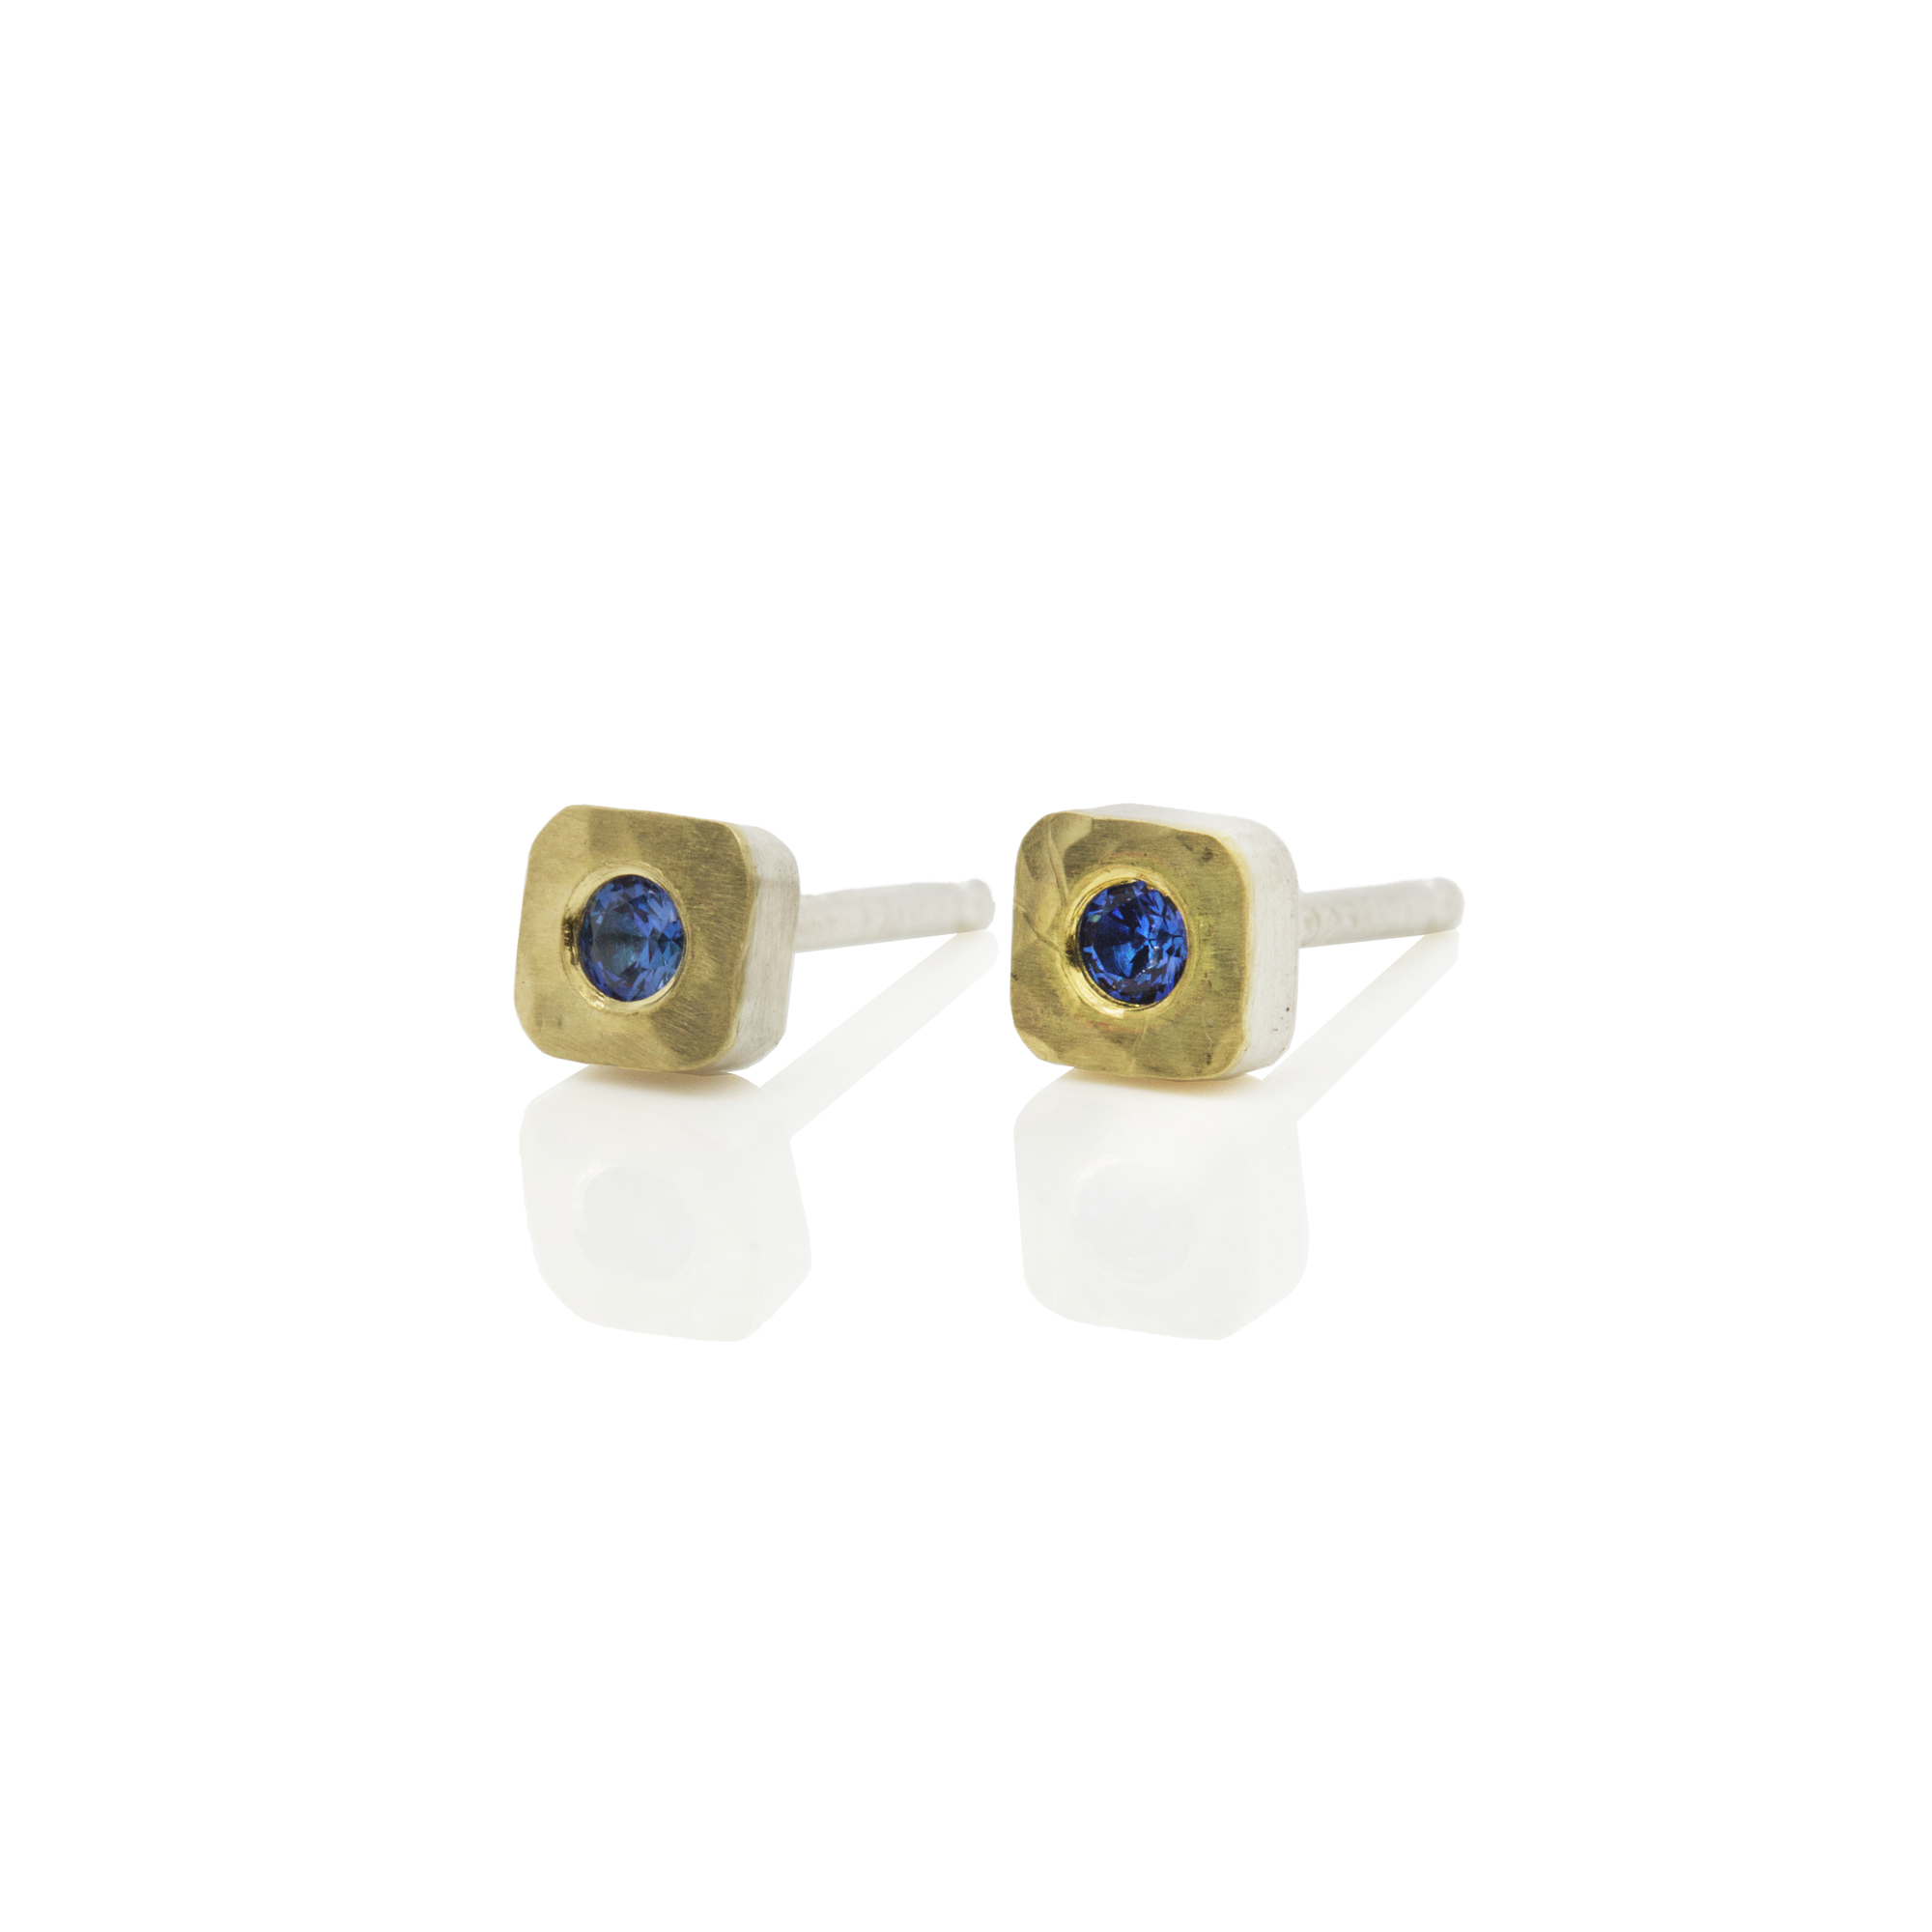 4mm Cell Studs in Hammered Gold with Ceylon Blue Sapphire Accents